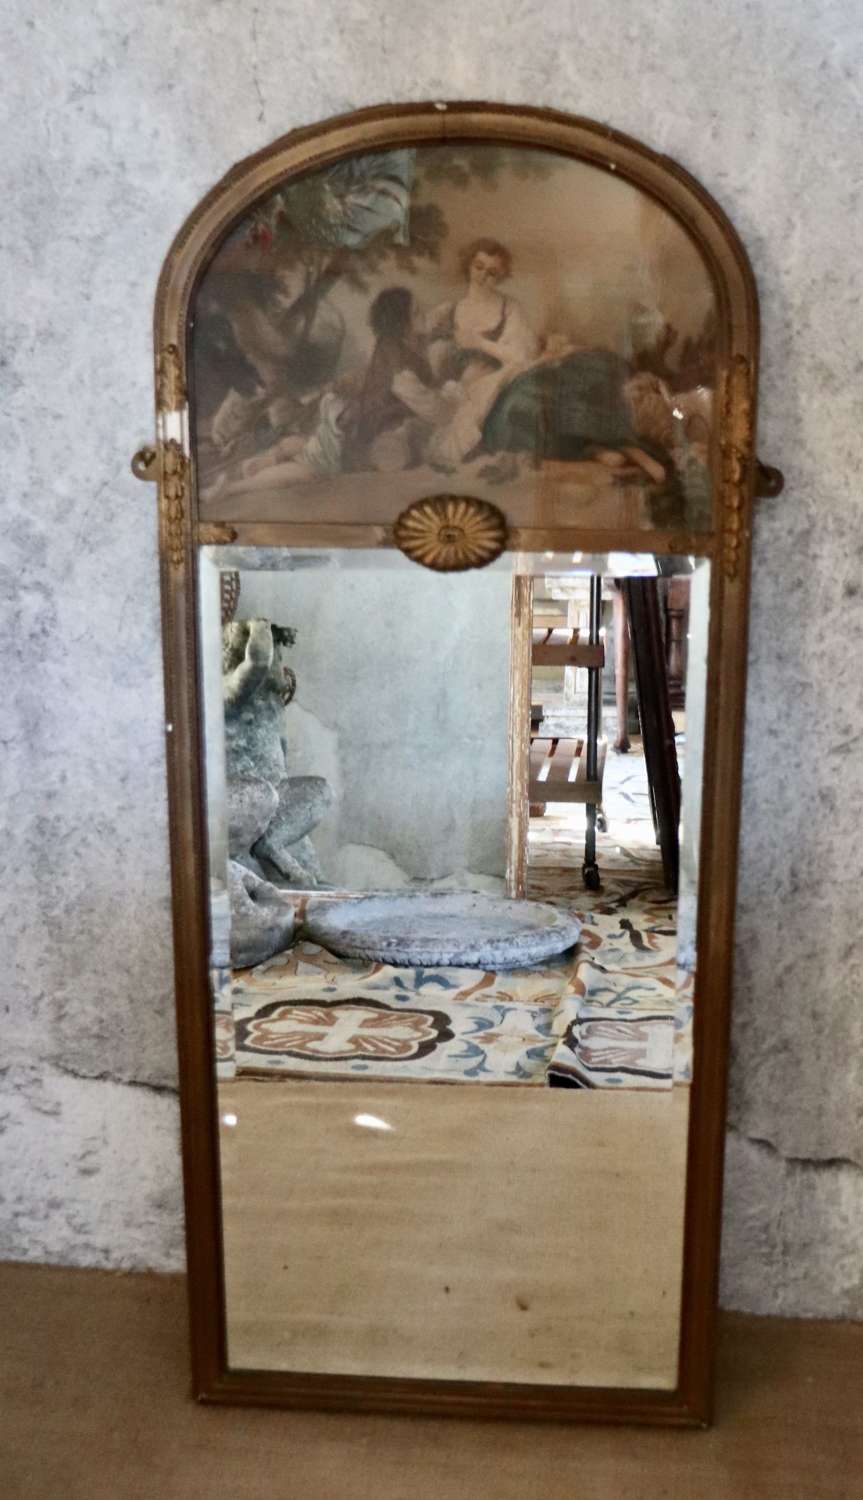 Late 19th/Early 20th century trumeau mirror